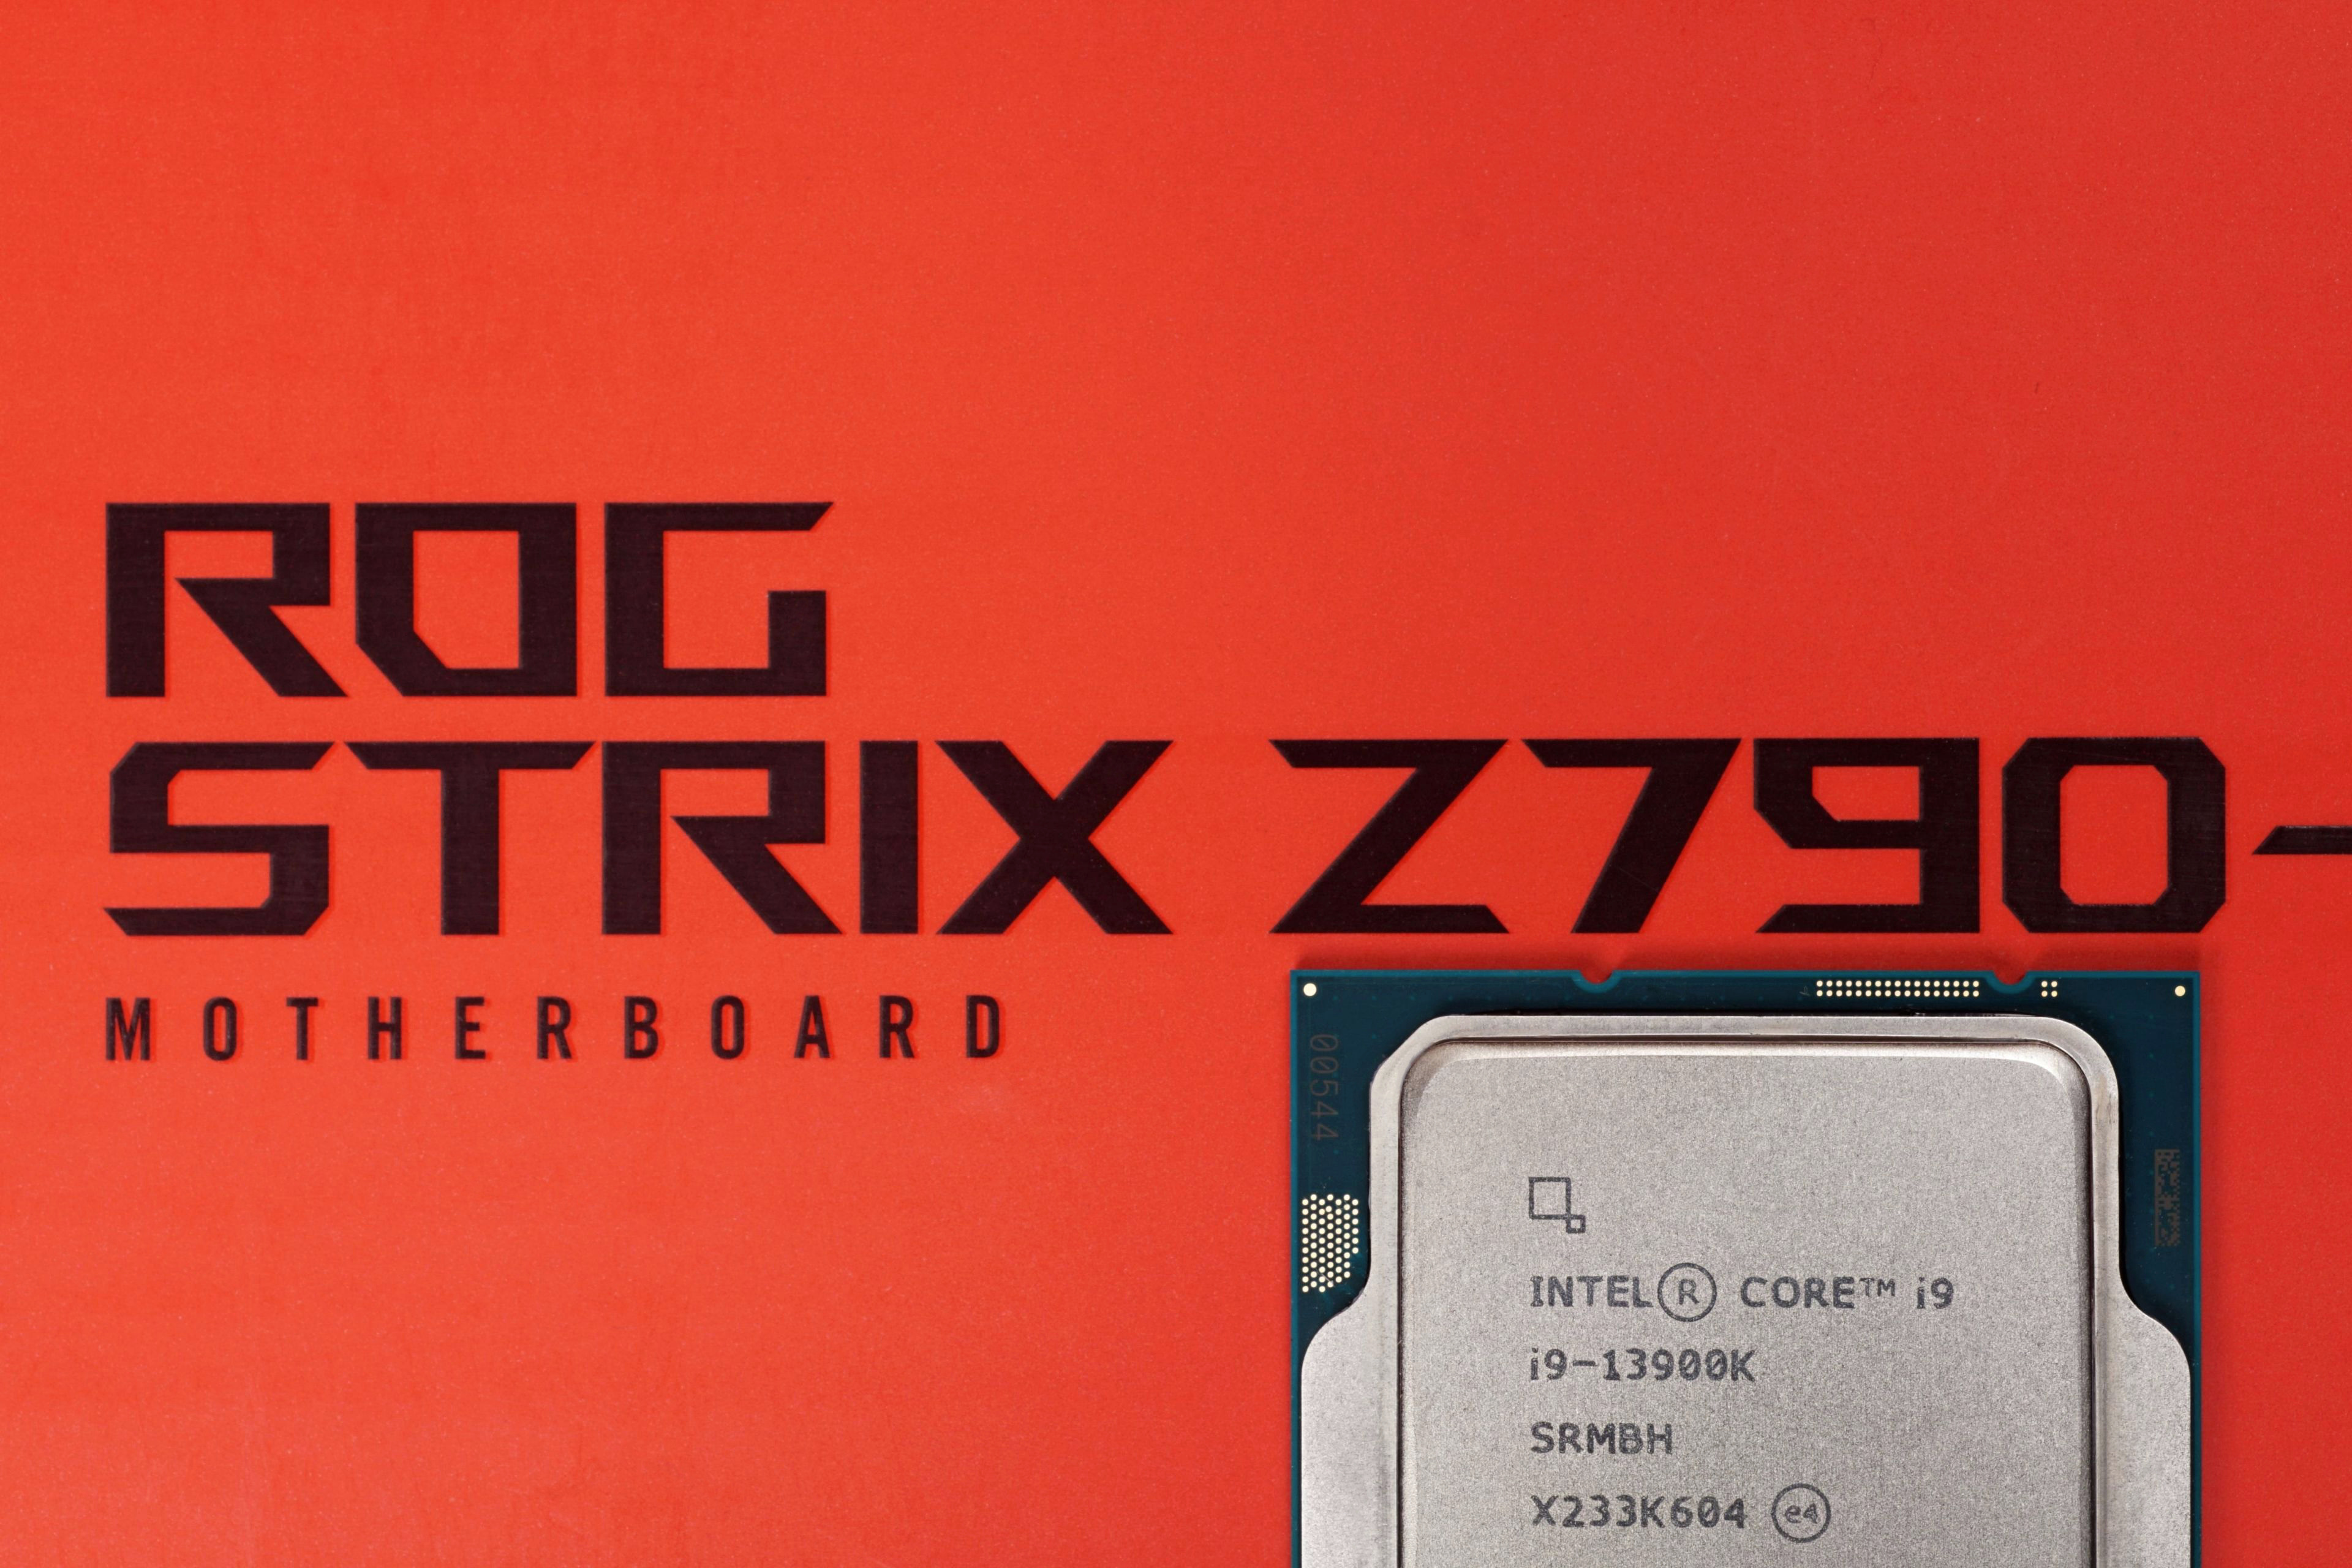 Intel Z790 Motherboard Roundup: 11 Motherboards Tested